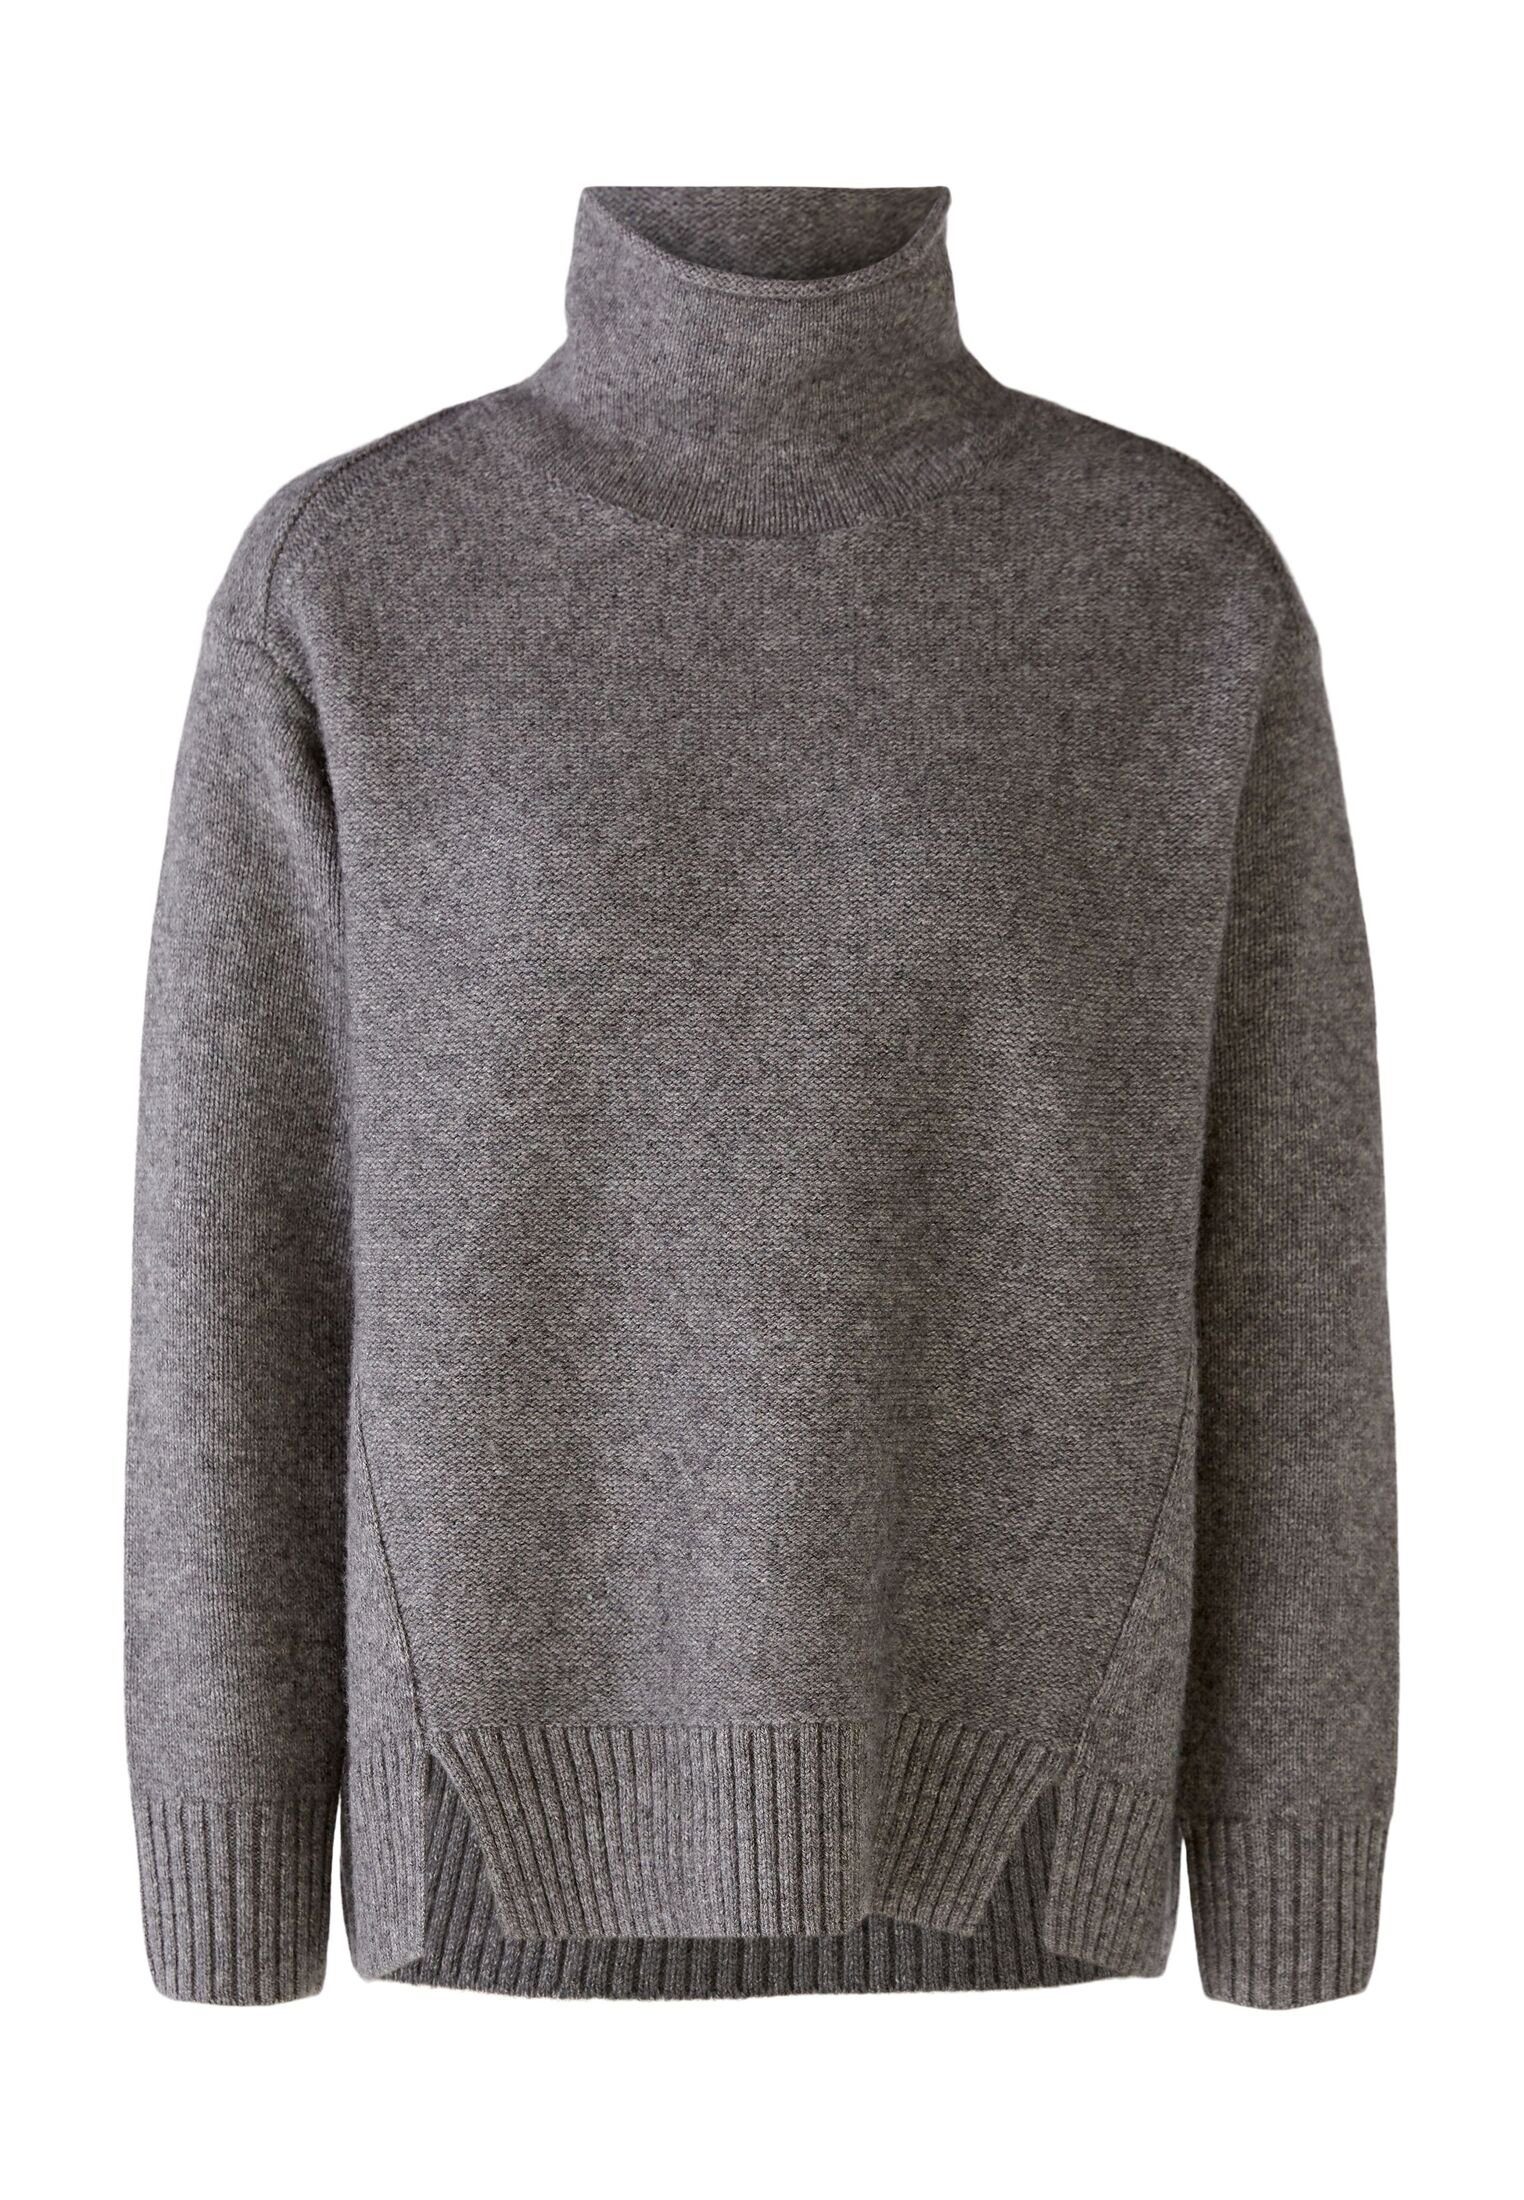 Oui Strickpullover Pullover Wollmischung grey